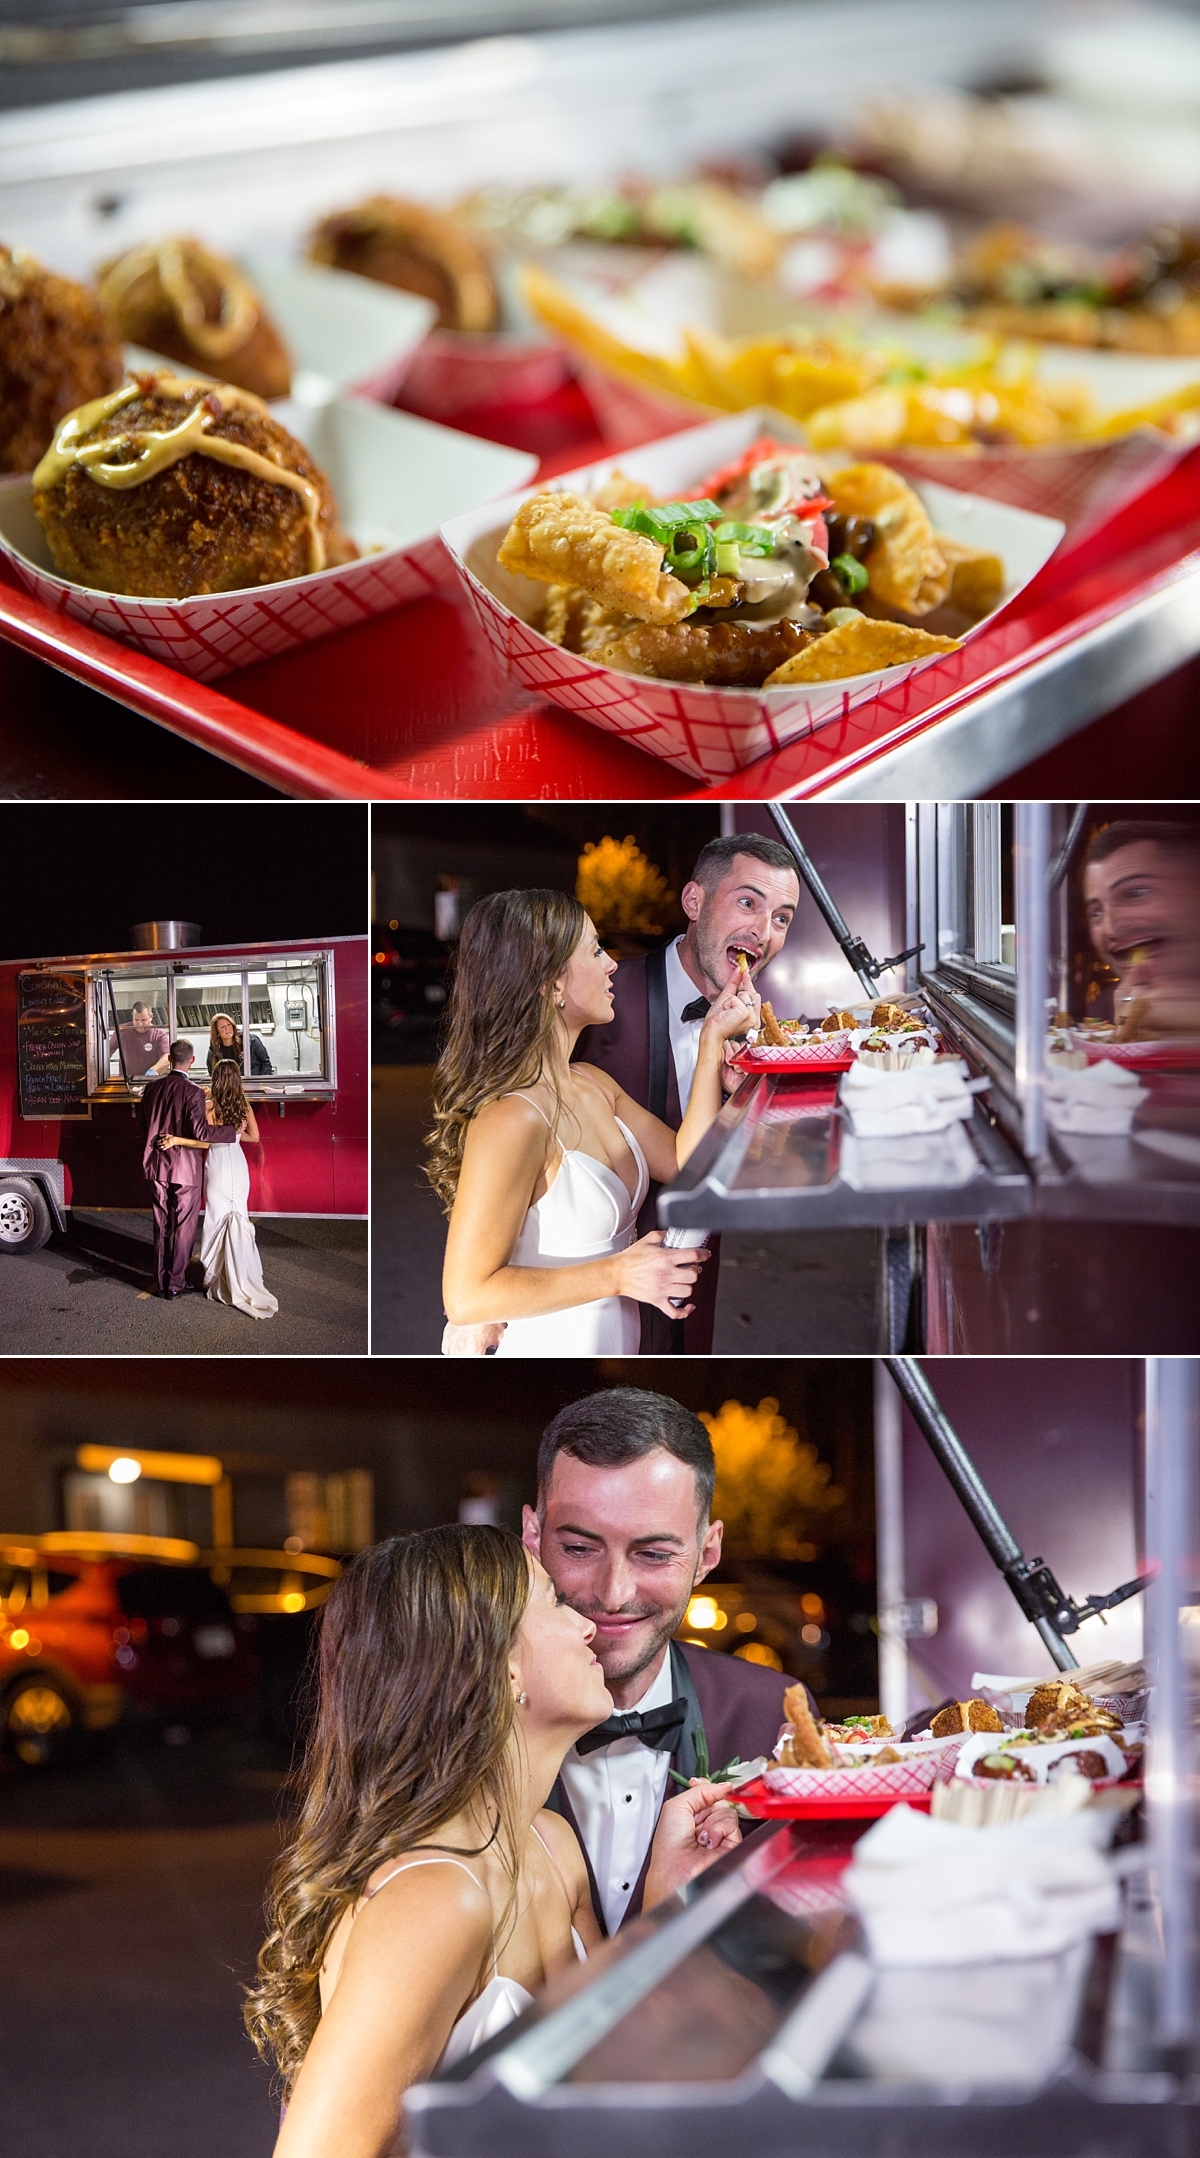 chantelle marie lakehouse and celebration venue, sarah heppell photography, whistlestop florist reception decor, mlh events reception decor, wedding food truck, bride and groom enjoy food truck at wedding reception